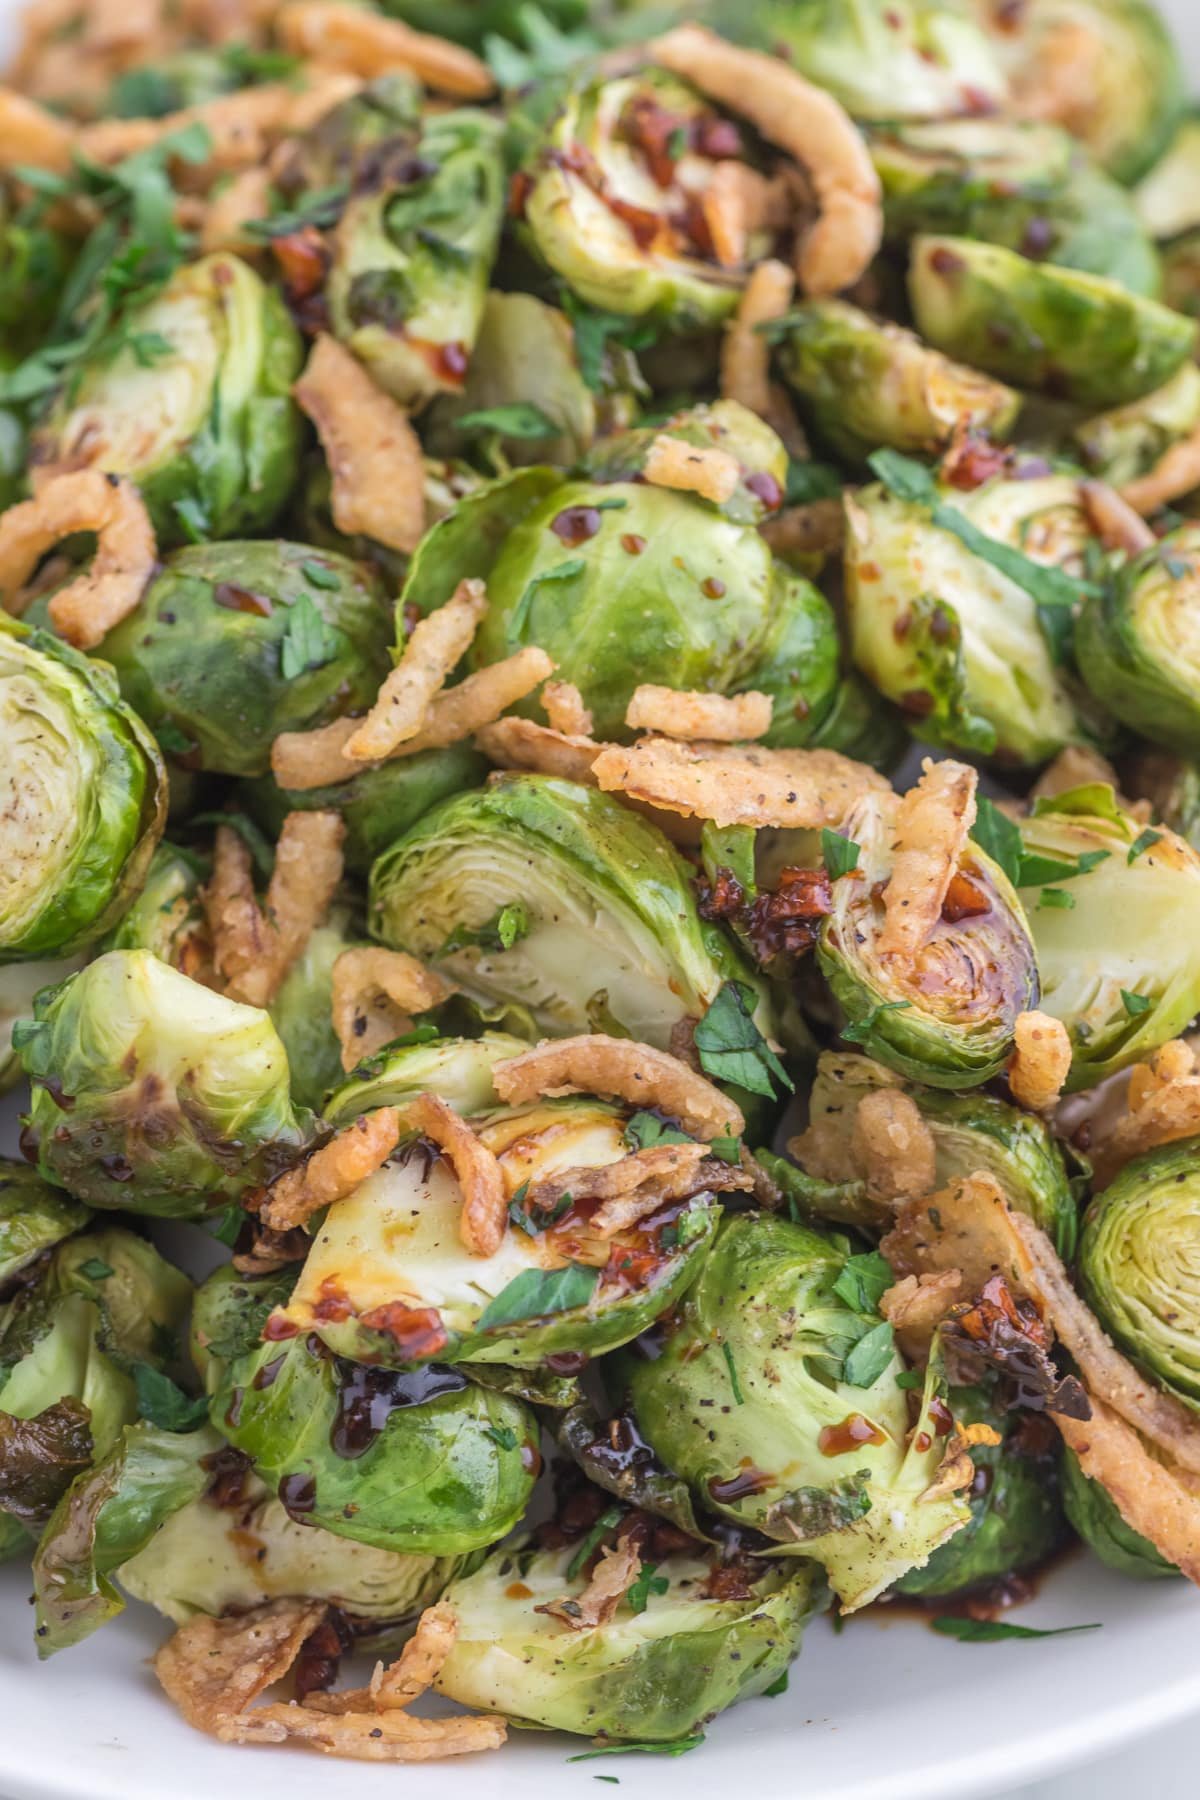 A close up of brussels sprouts that have been roasted and topped with crispy onions.